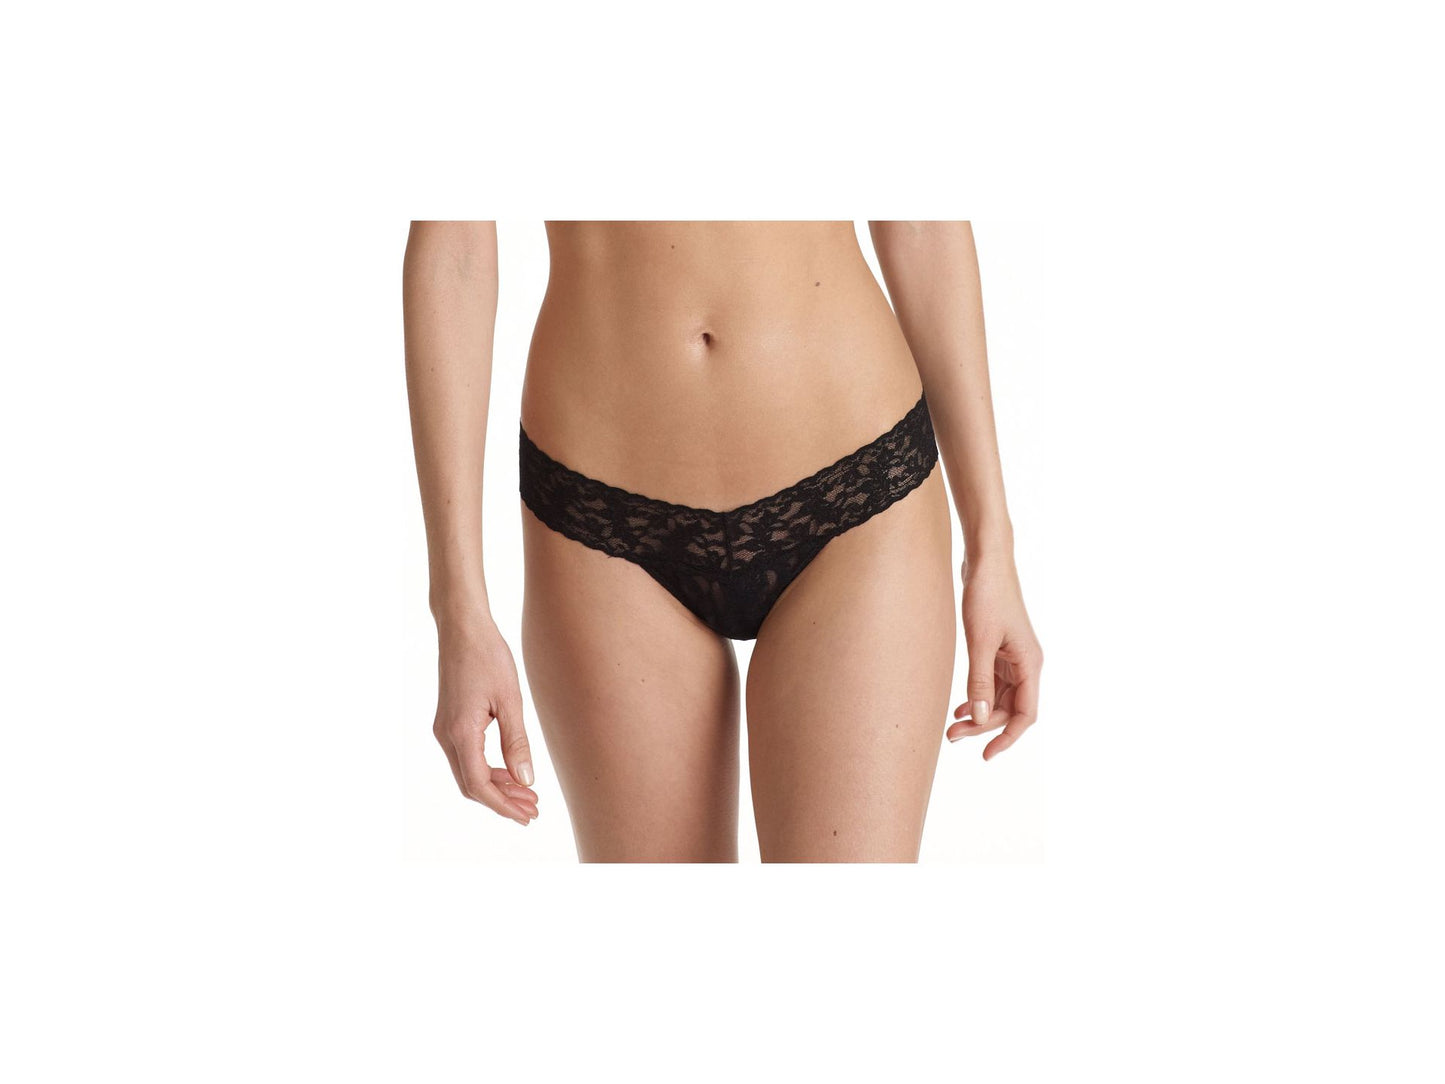 Women's Signature Lace Low Rise Stretch Thong